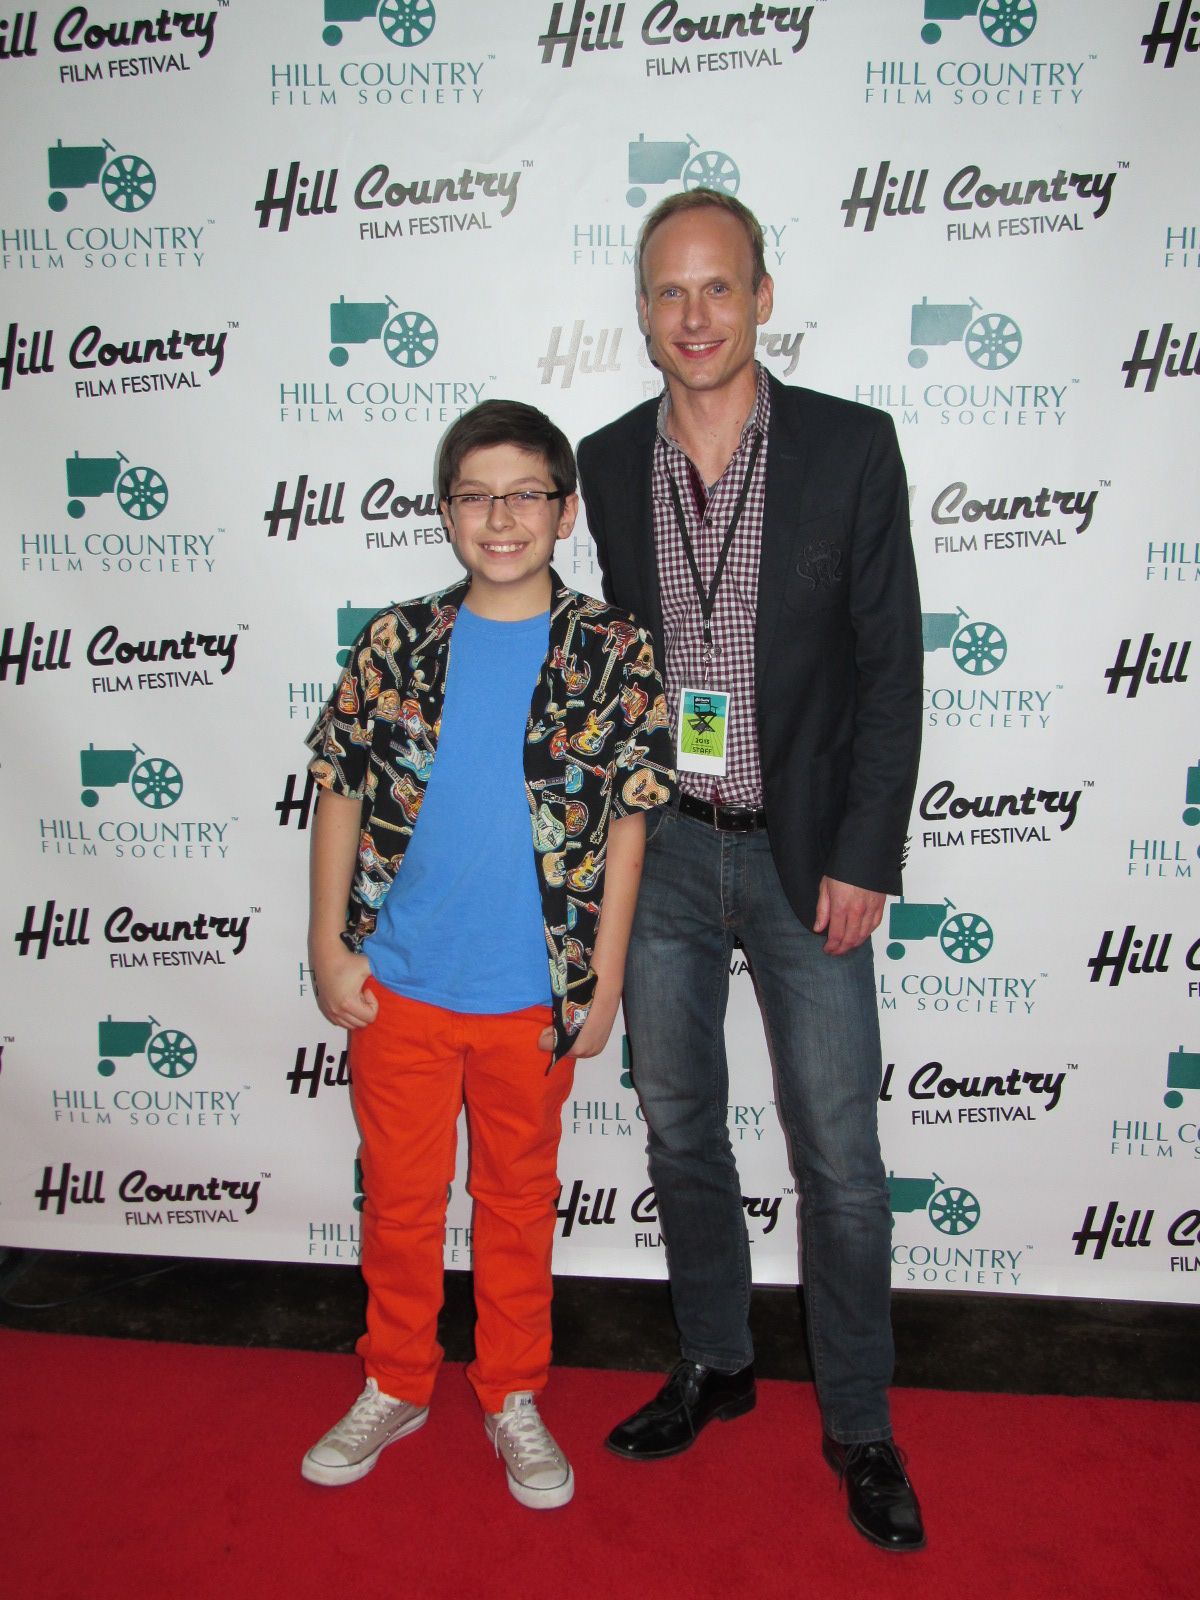 Evan Materne on the red carpet with Detention writer/director Chad Mathews